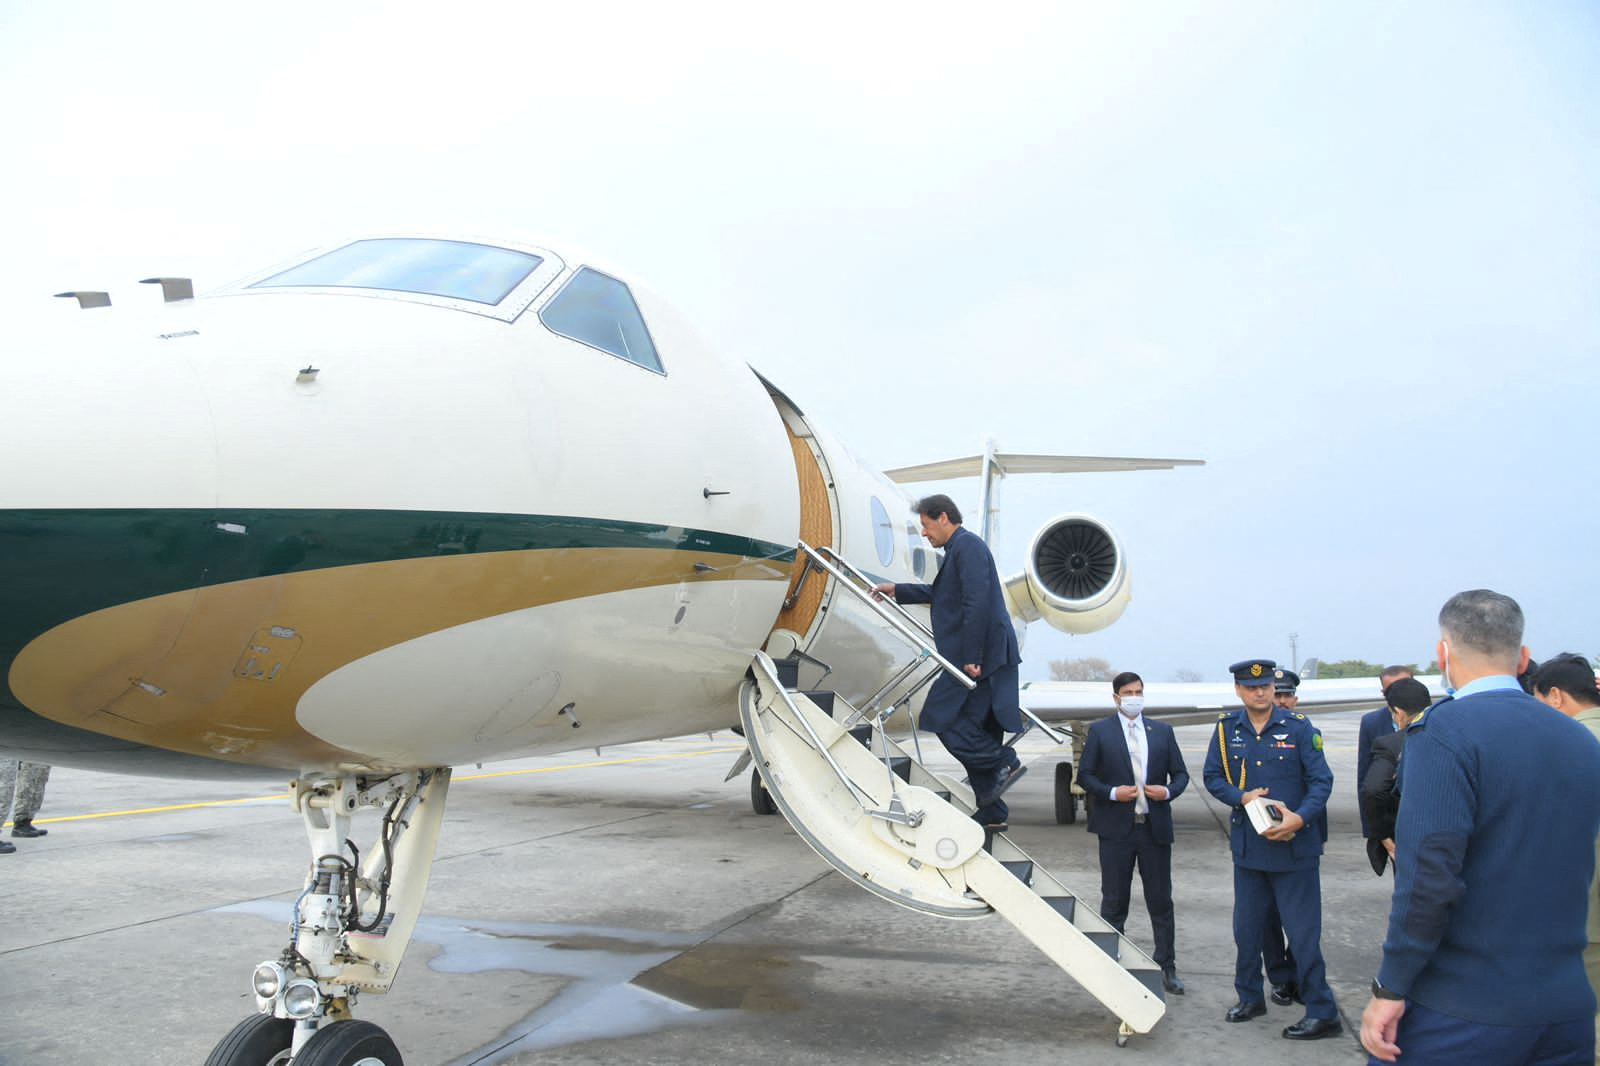 Pakistan's Prime Minister Imran Khan boards a plane before his departure to Moscow, at an airbase in Islamabad